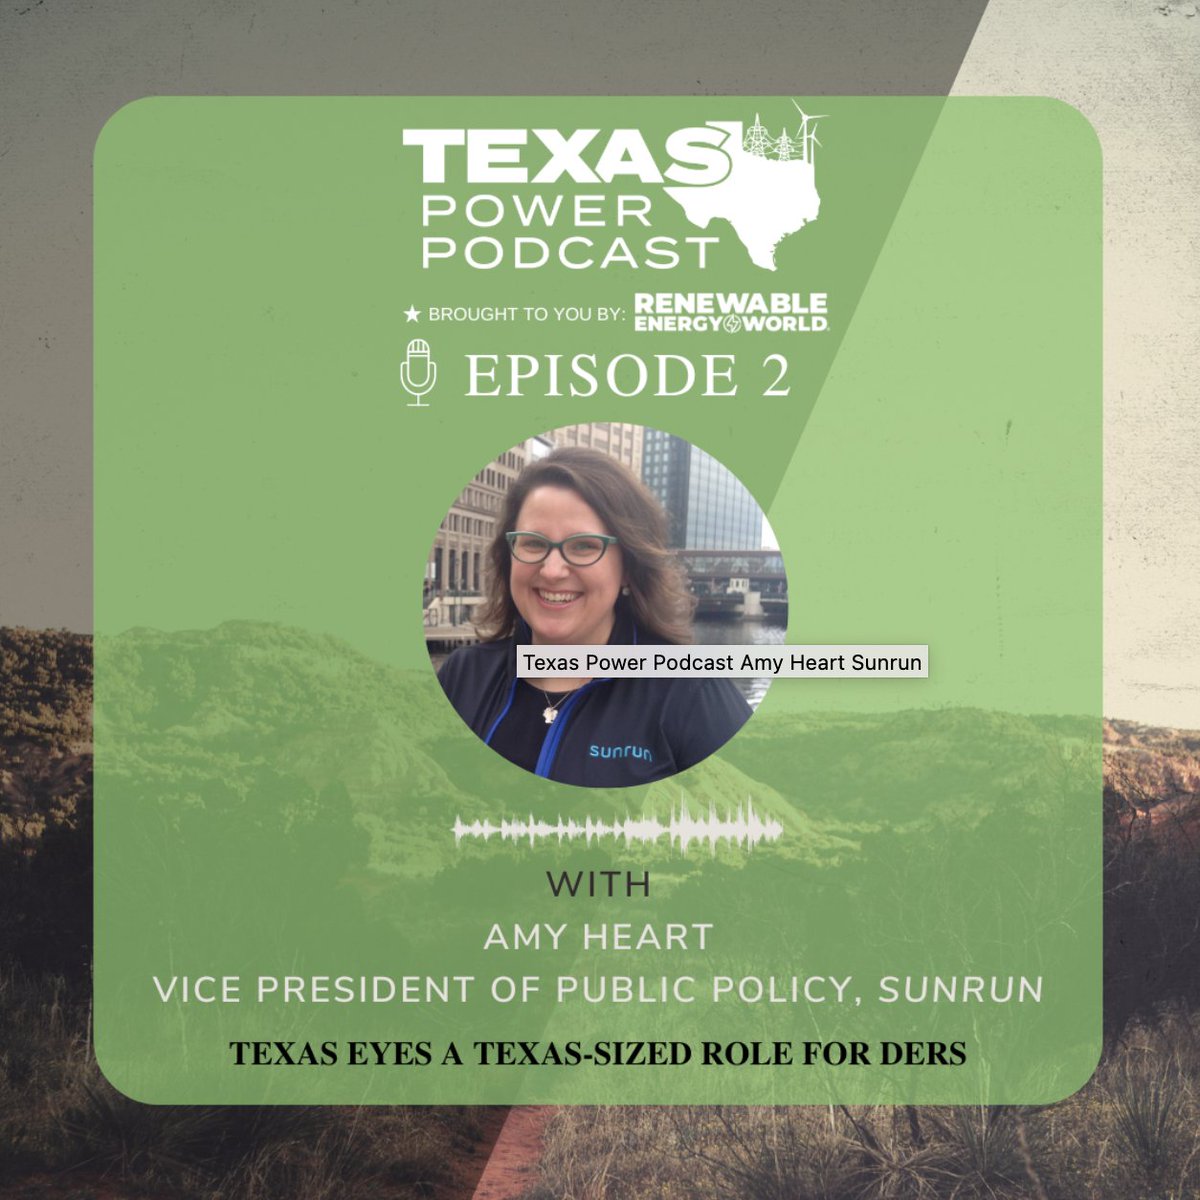 It was such a pleasure to chat w/ @douglewinenergy about how Texas is gearing up to put home solar+batteries to work for the grid. Catch the latest episode of Texas Power Podcast from @REWorld here: renewableenergyworld.com/podcasts/texas…